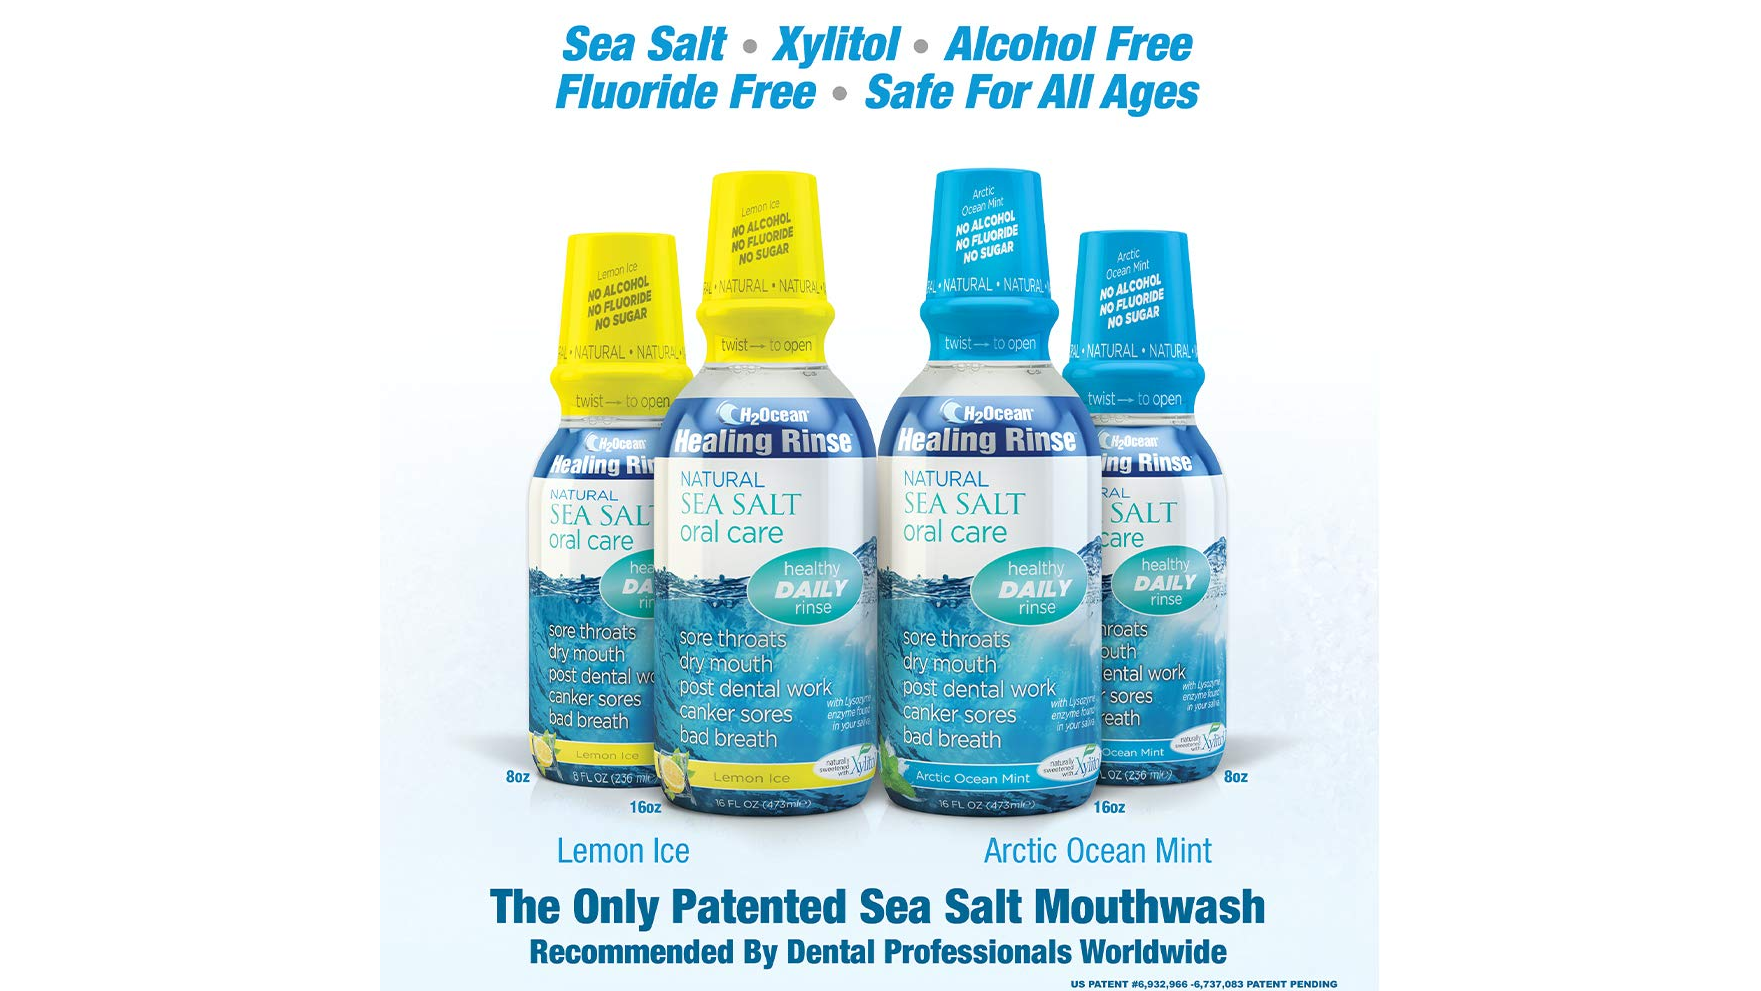 Science Shows The Best Cure For Xerostomia & Dry Mouth Are These Sea Salt Rinses